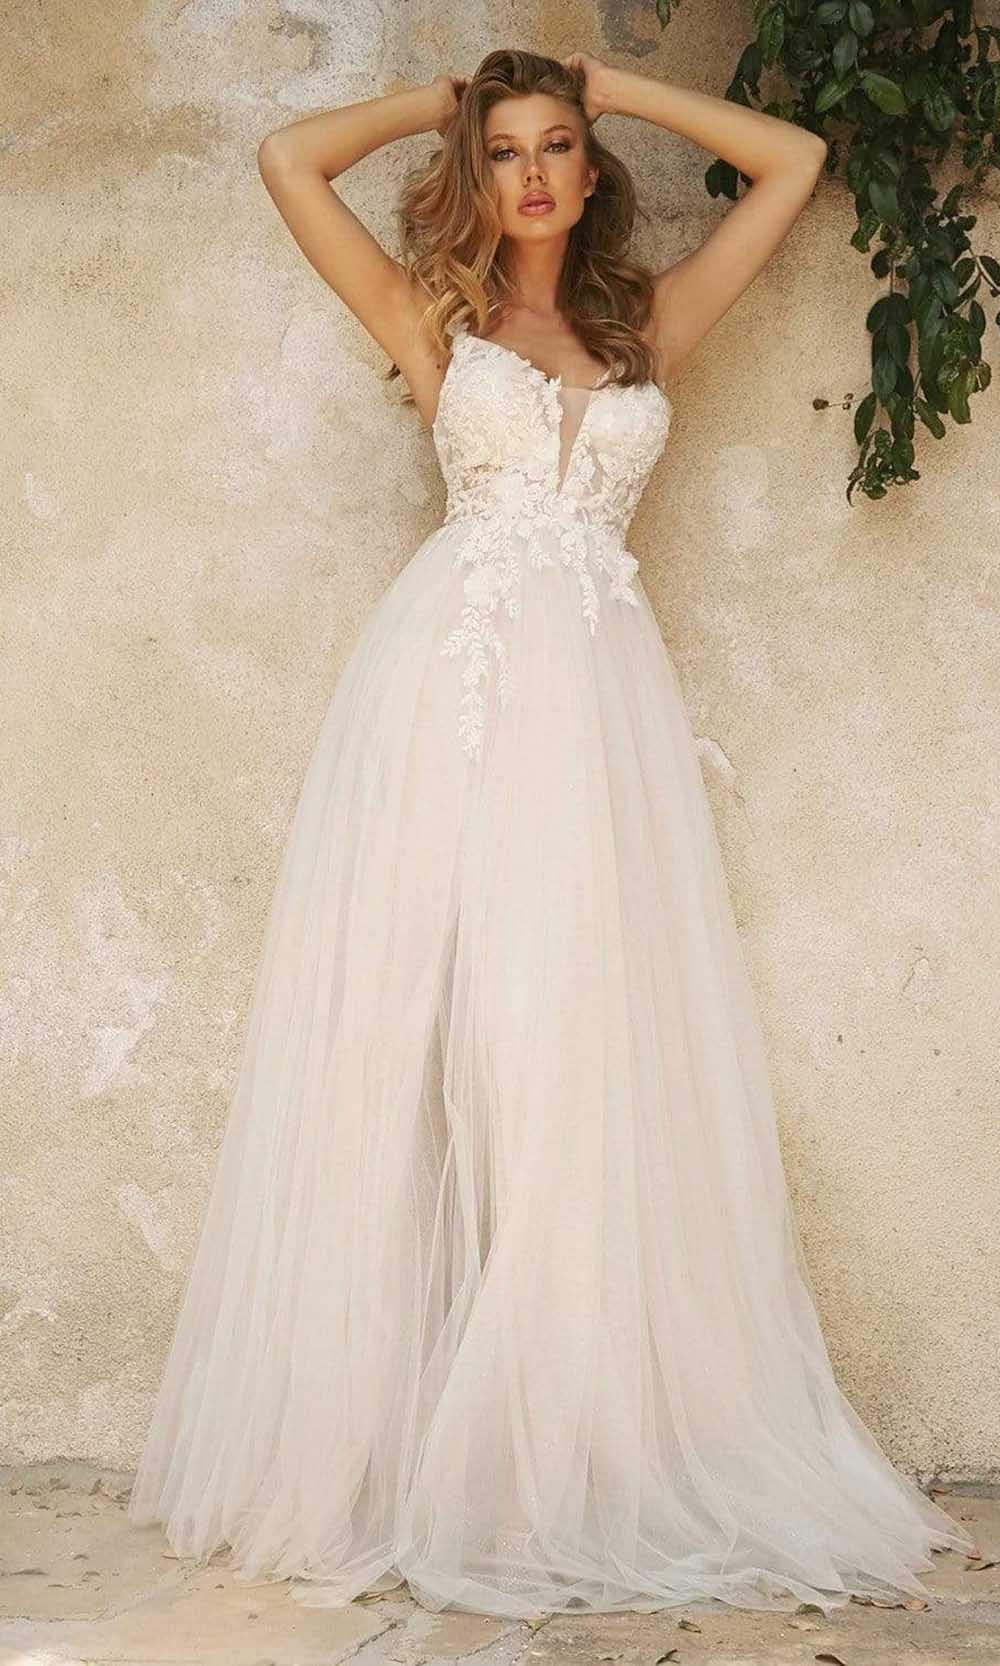 Cinderella Divine Bridal - CB072W Sleeveless Layered Tulle Gown
